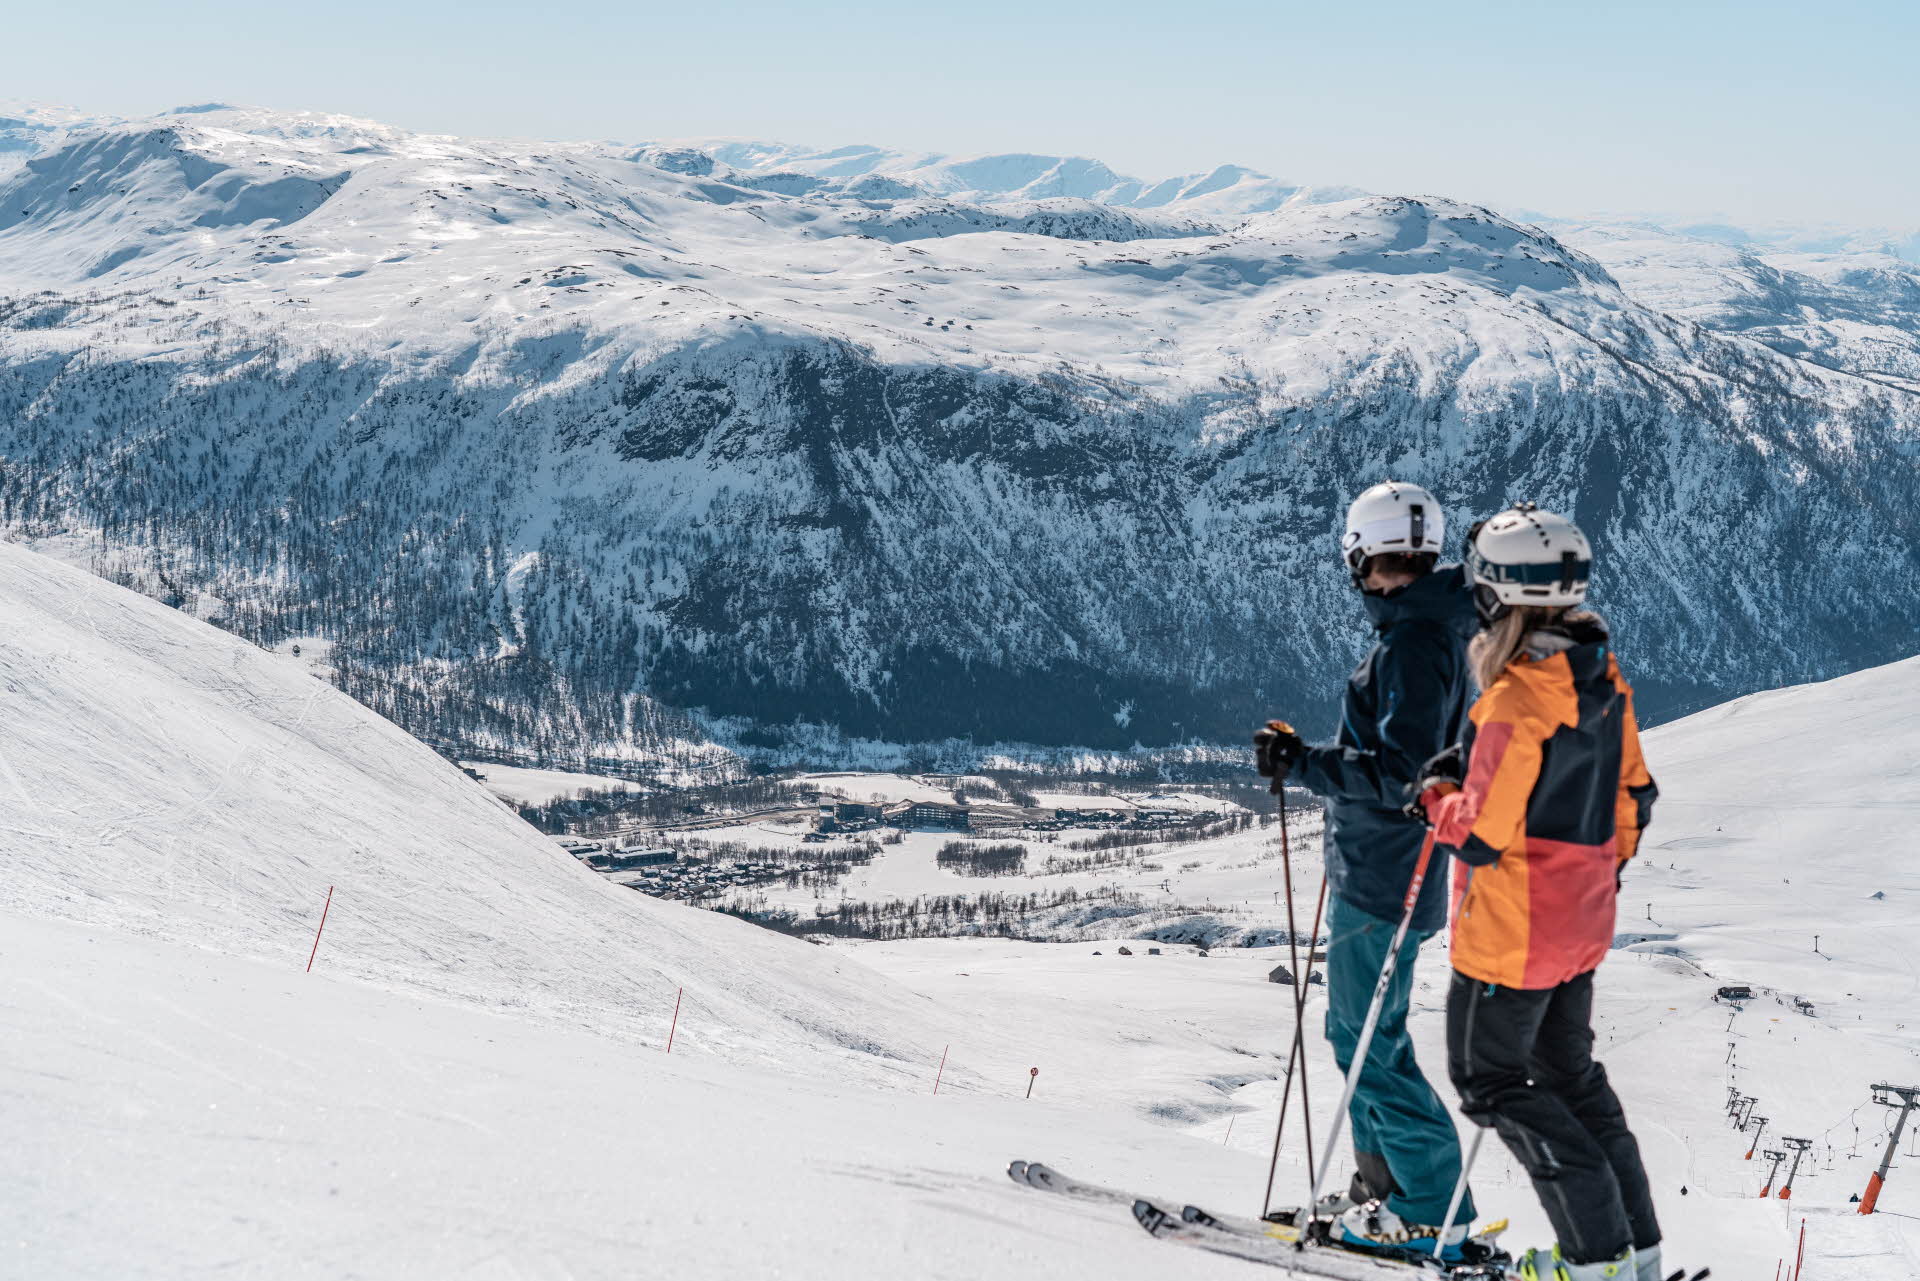 Two people on skis looking down on the slopes and surrounding snowy mountains in Myrkdalen